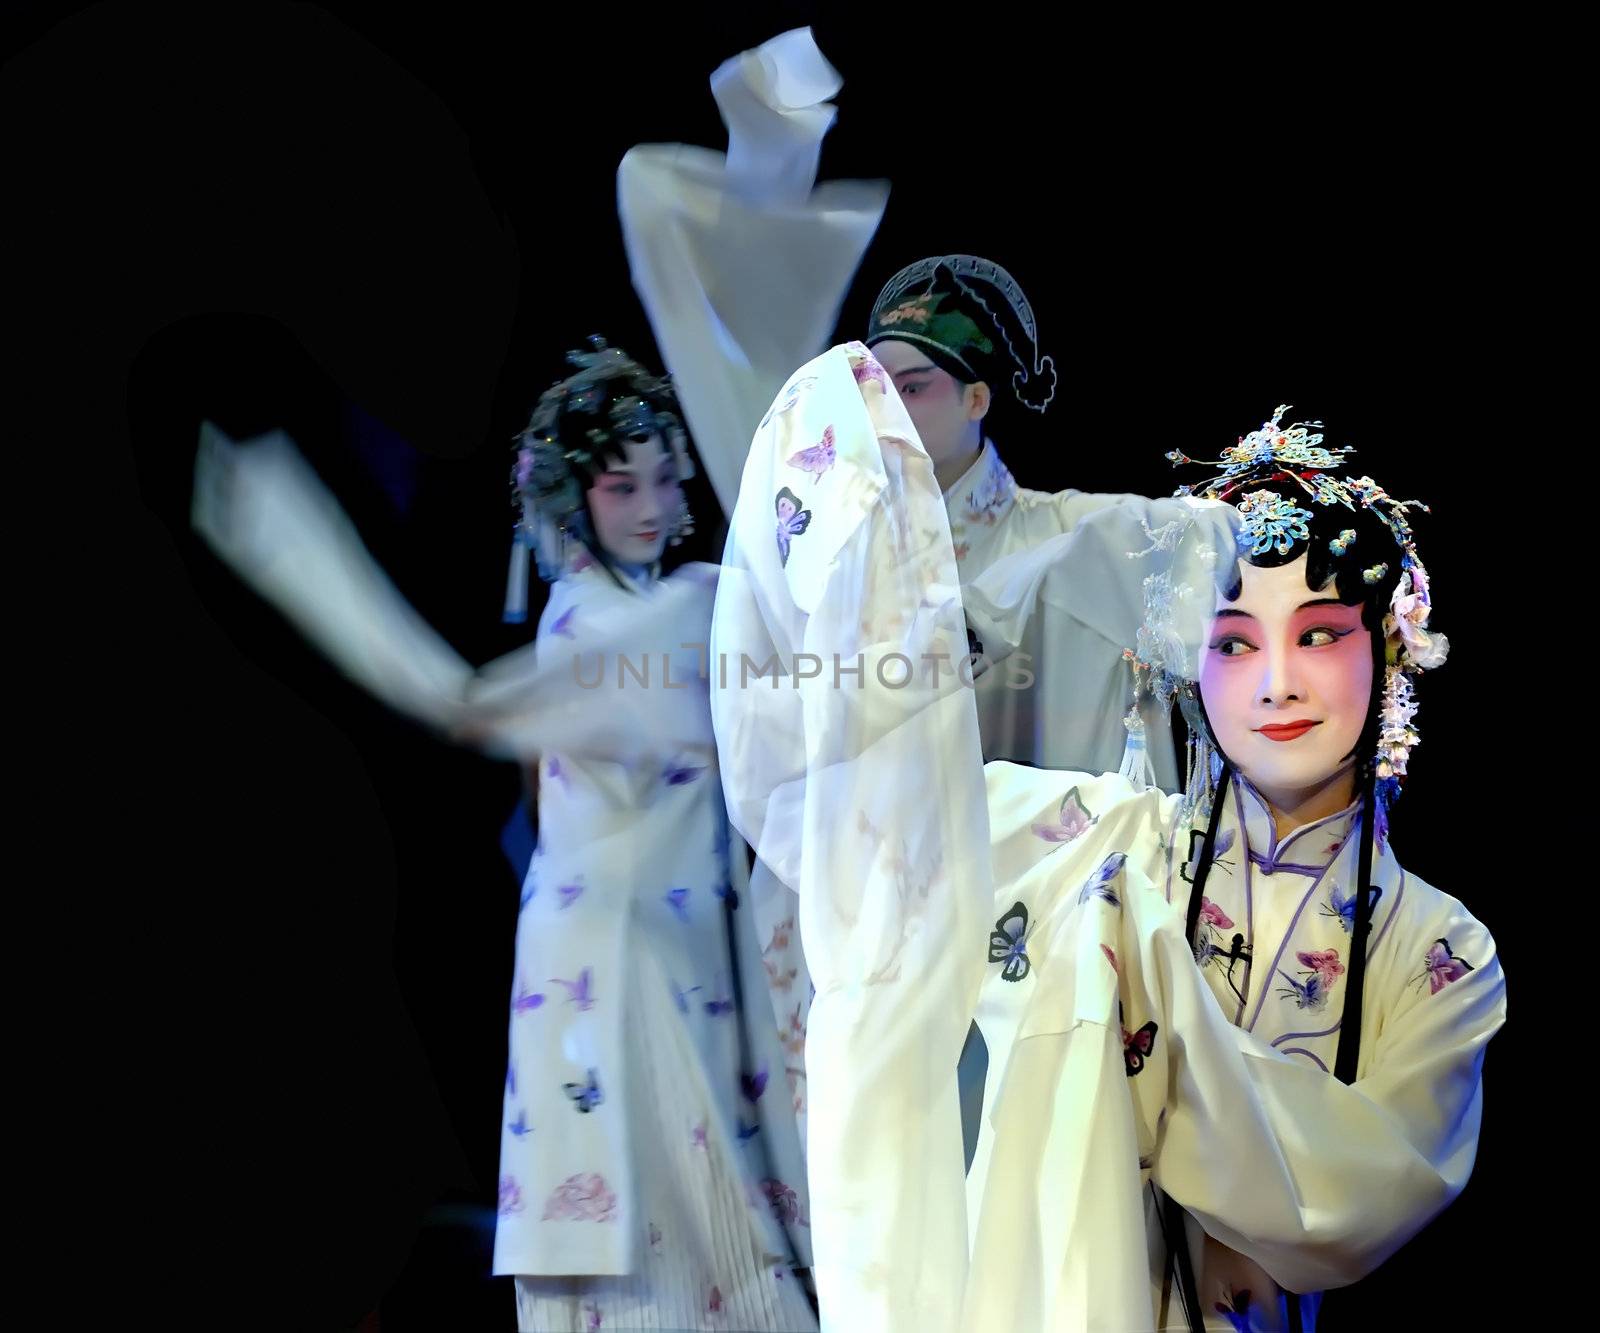 CHENGDU - MAY 23:Suzhou KunQu Opera Theater of china perform The Peony Pavilion at Golden theater May 23, 2007 in Chengdu, China.
The leading role is the famous opera actress Shen Fengying.

